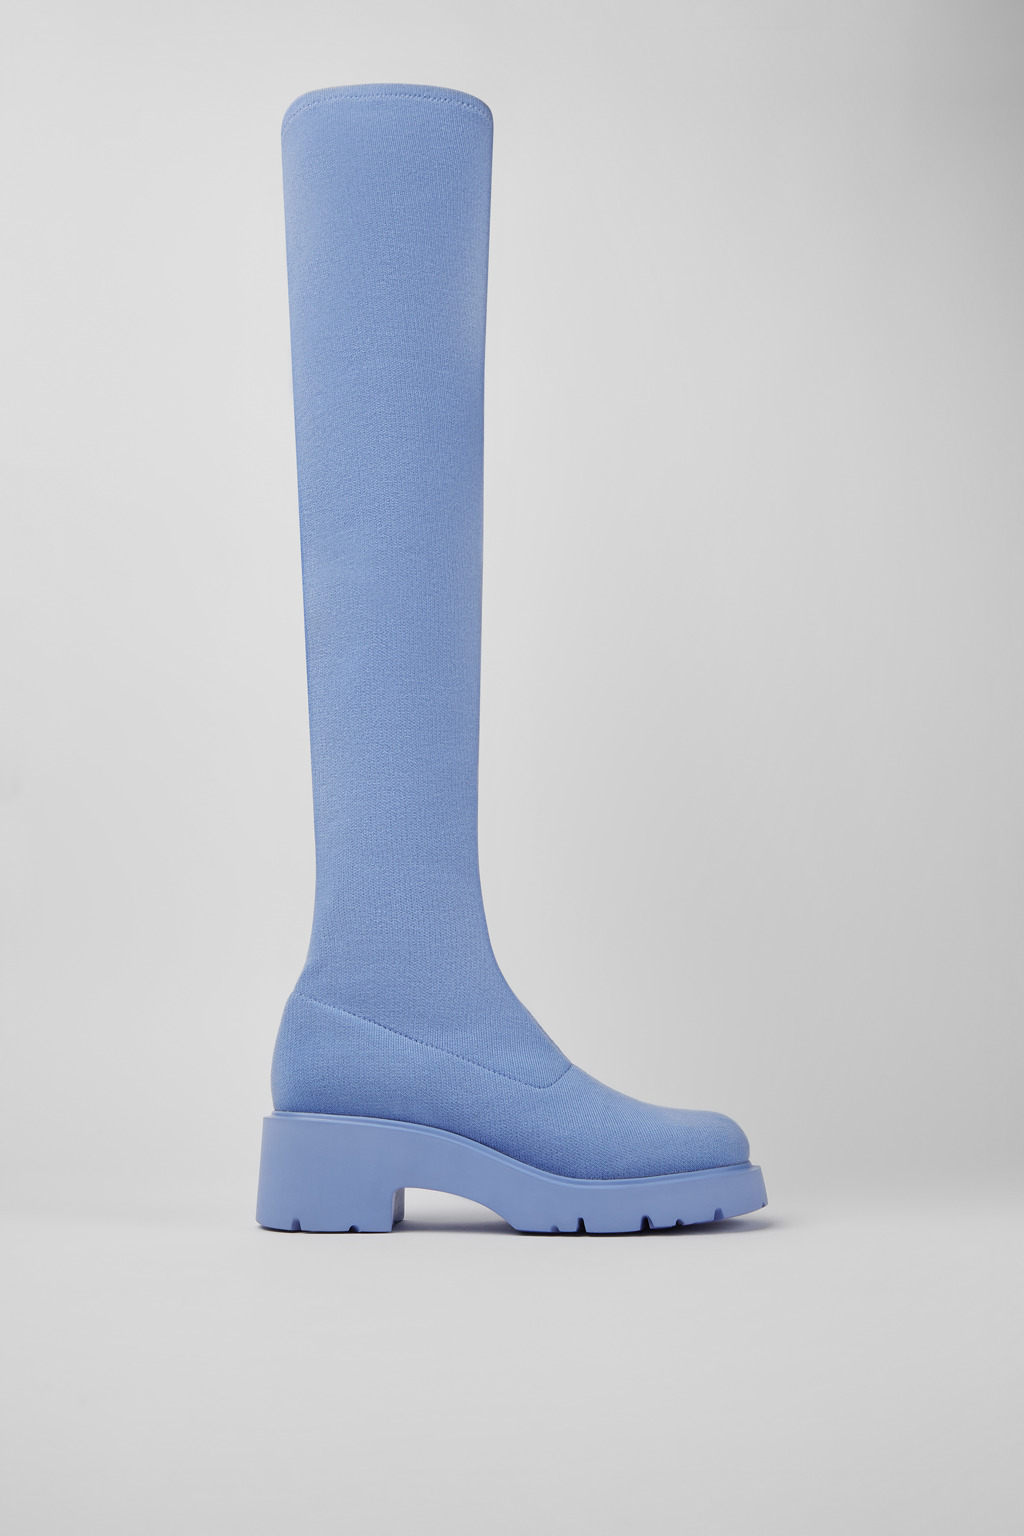 Milah Blue Boots for Women - Spring/Summer collection - Camper 